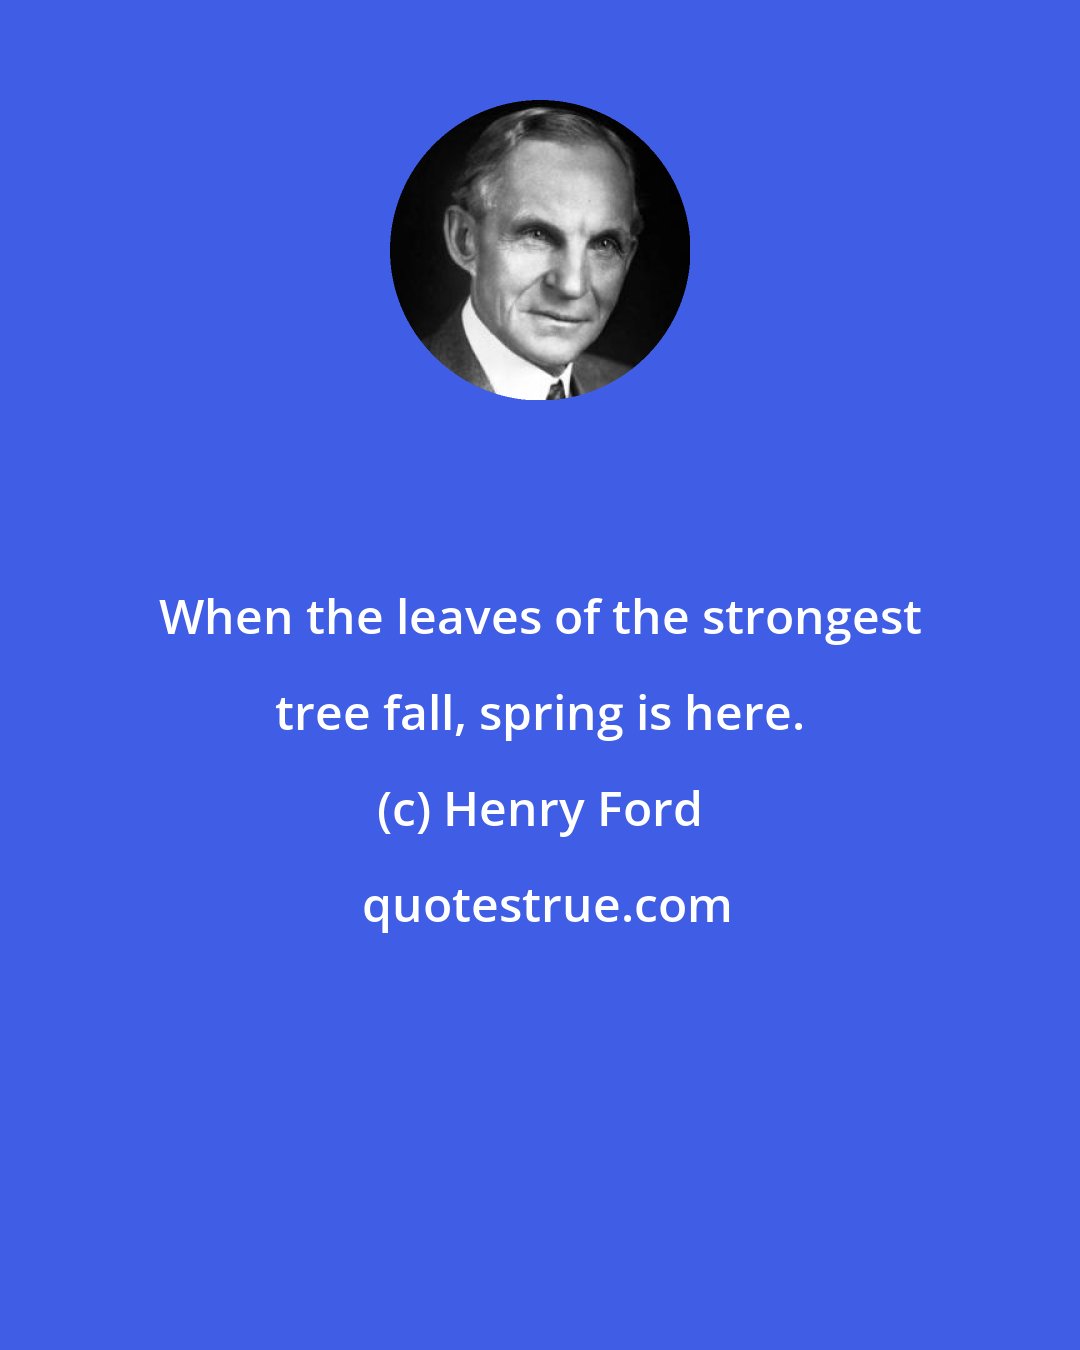 Henry Ford: When the leaves of the strongest tree fall, spring is here.